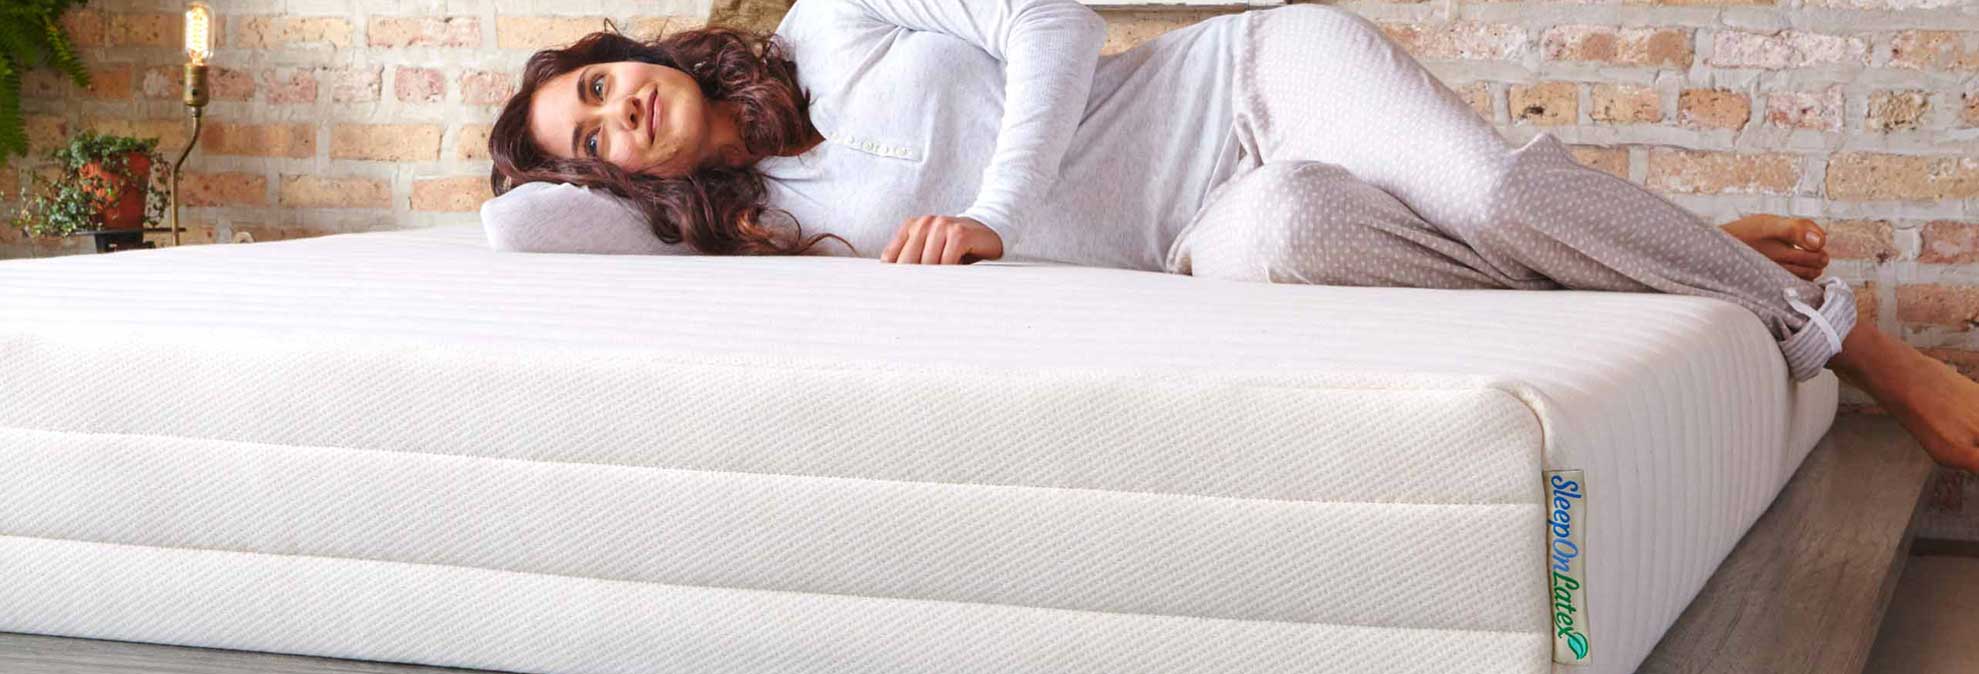 best mattress pads queen fitted consumer reports